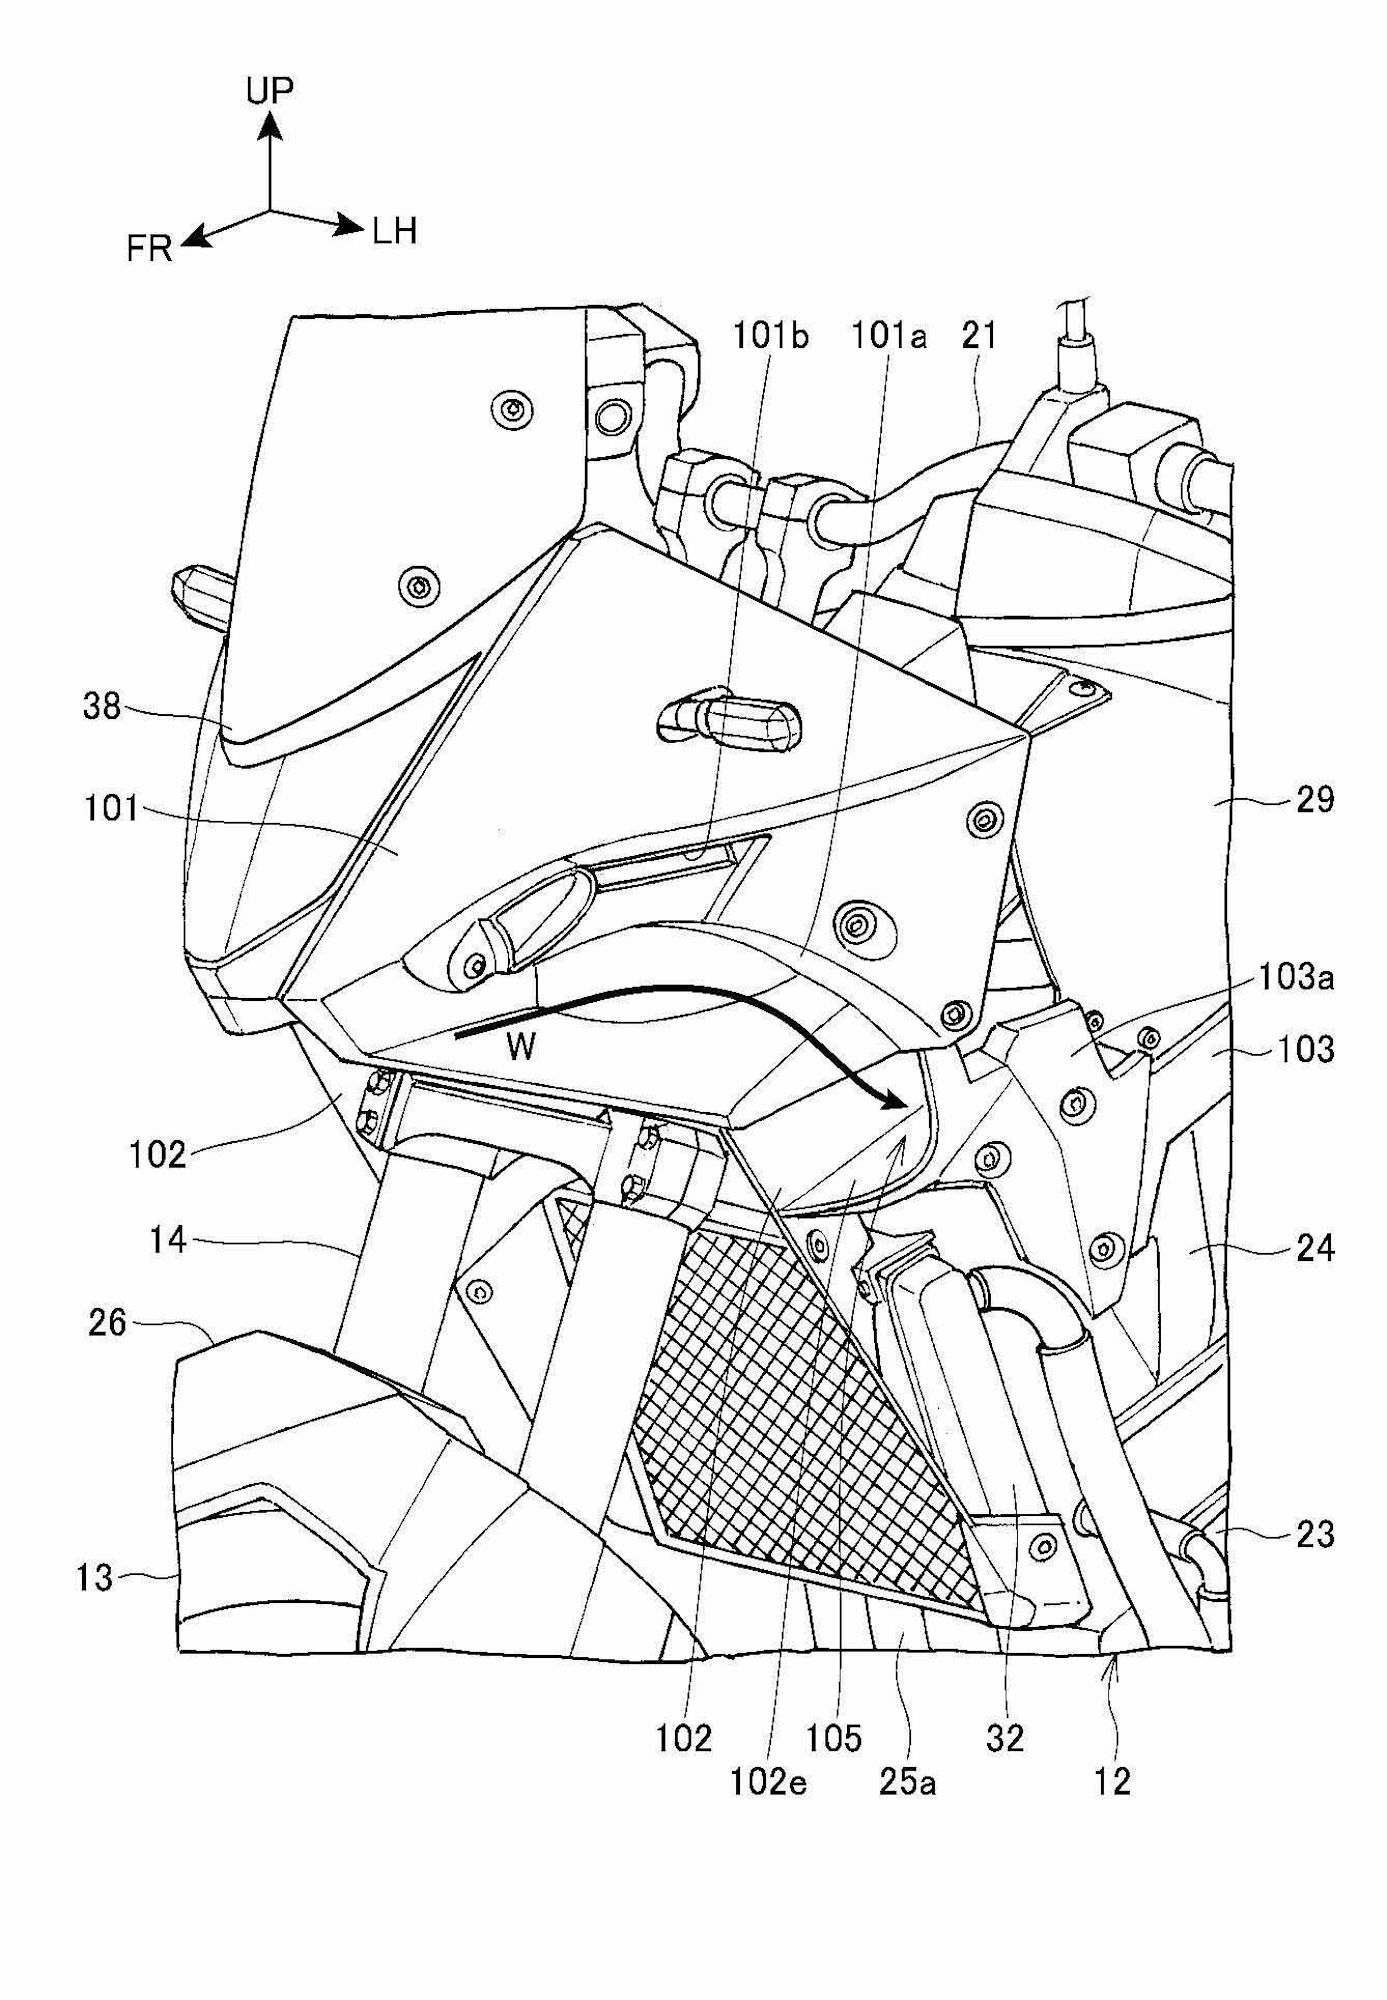 New patent images showing additional details on the upcoming Transalp XL750. Media sourced from CycleWorld.